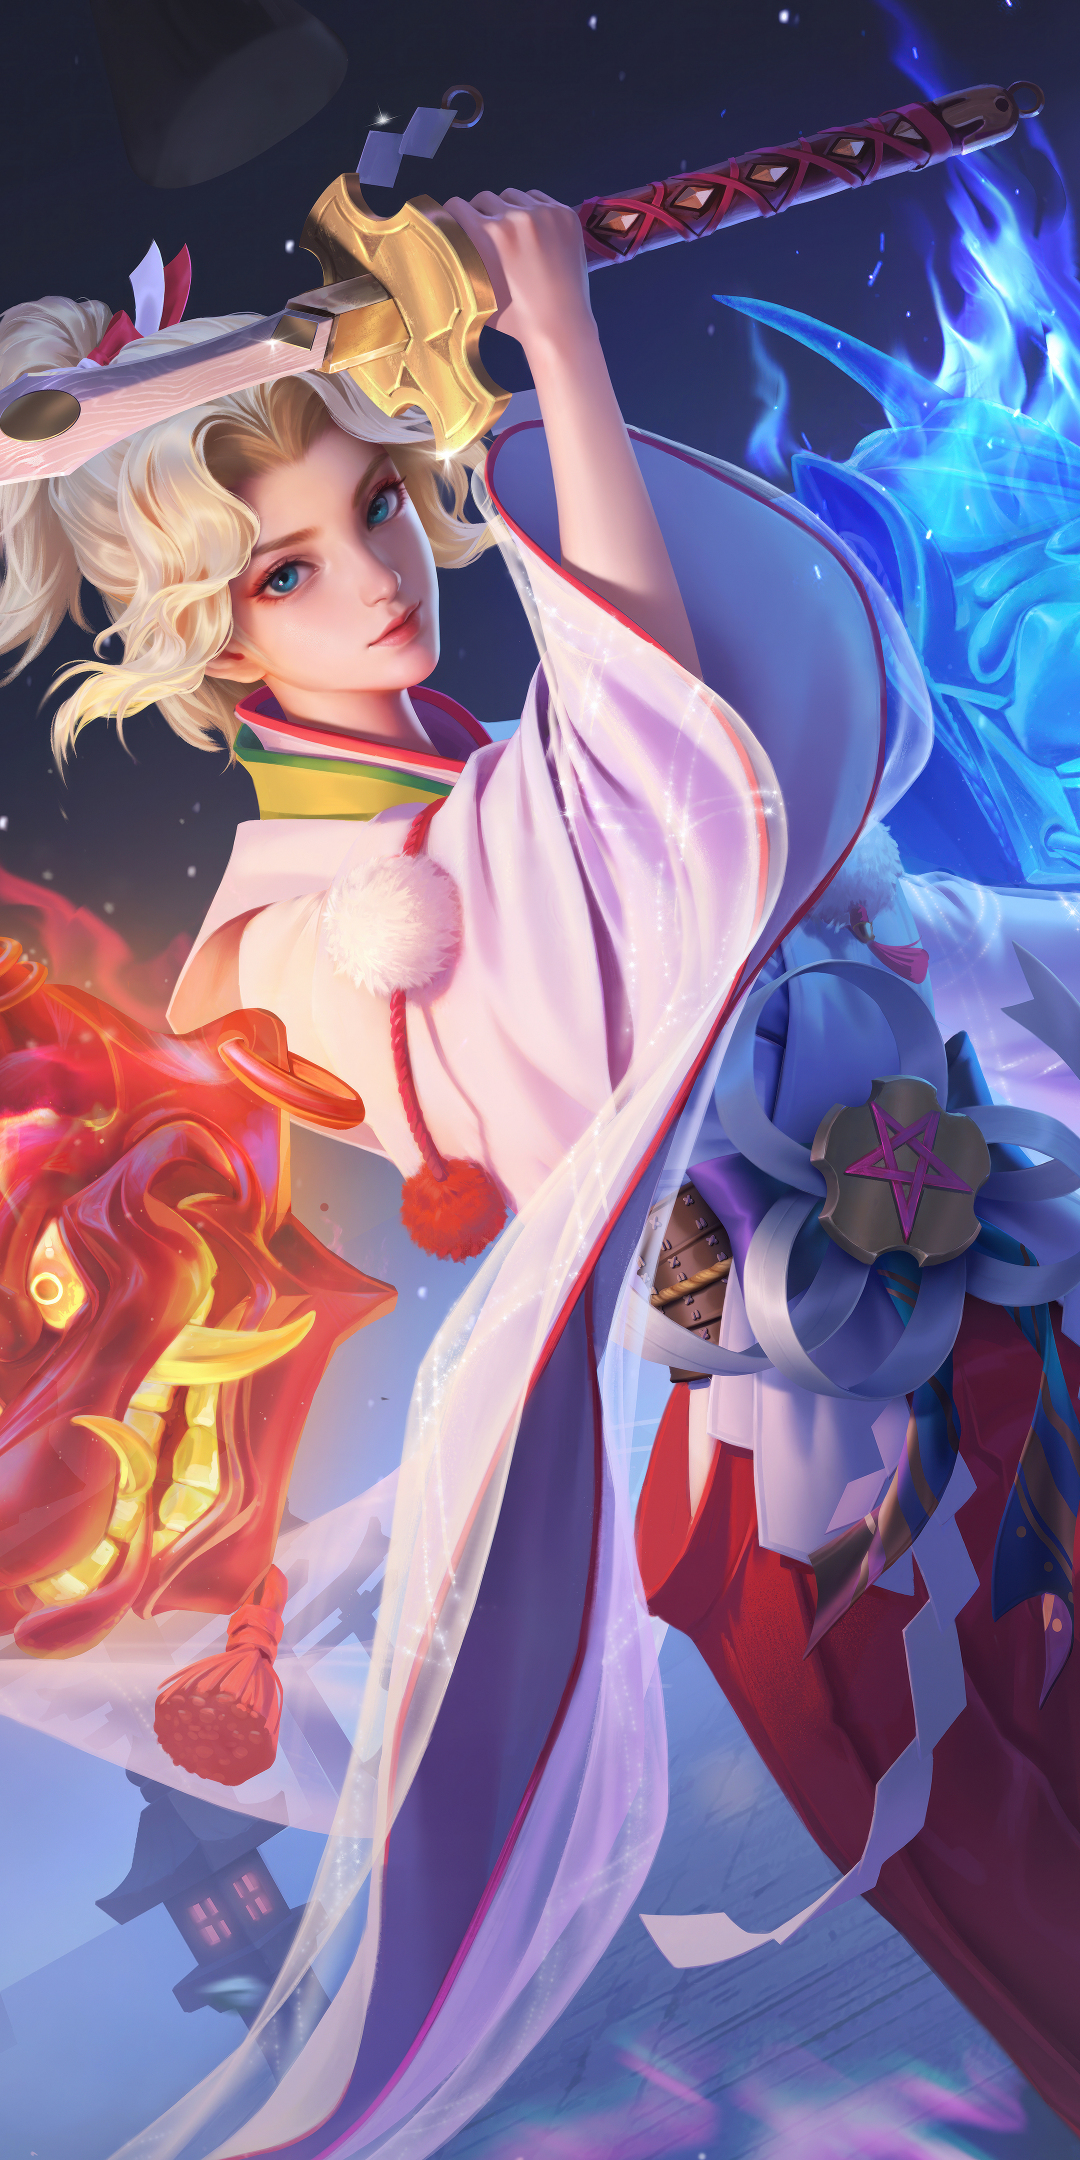 Honor of kings woman character, and fighter girl, 2023, 1080x2160 wallpaper